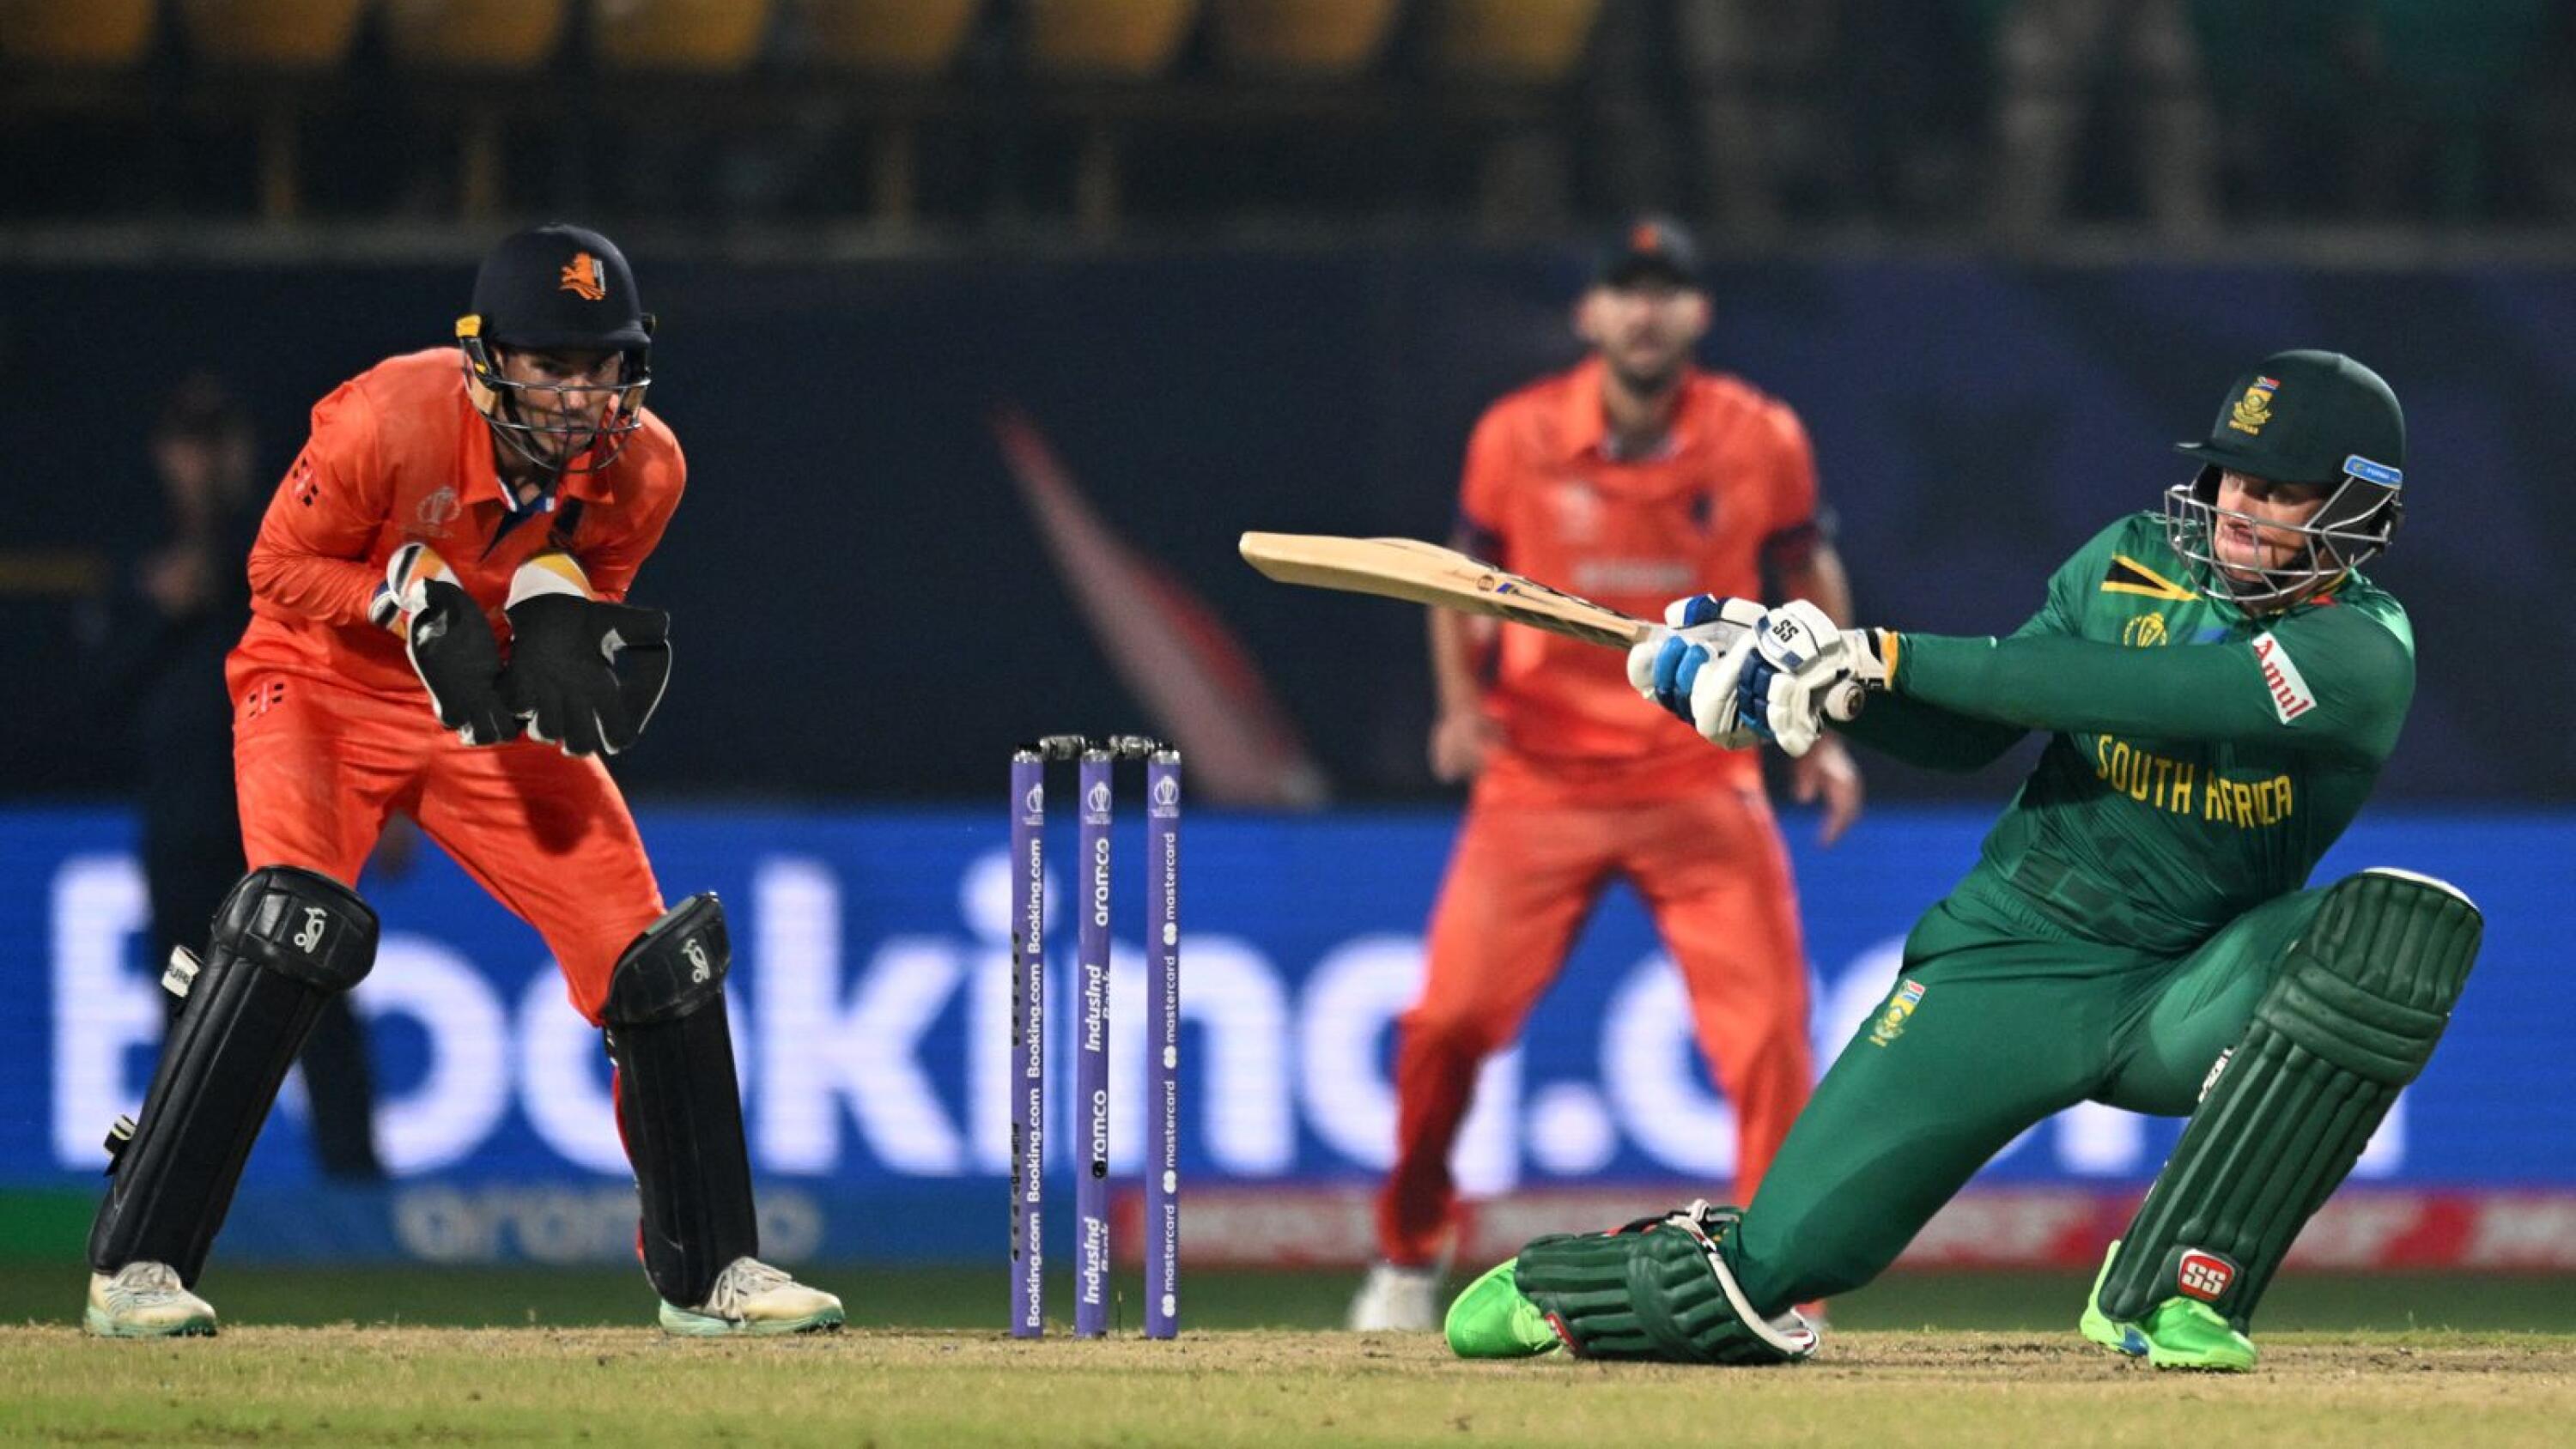 South Africa's Rassie van der Dussen (R) plays a shot as Netherlands' wicketkeeper captain Scott Edwards watches during the 2023 ICC Men's Cricket World Cup one-day international (ODI) match between South Africa and Netherlands at the Himachal Pradesh Cricket Association Stadium in Dharamsala